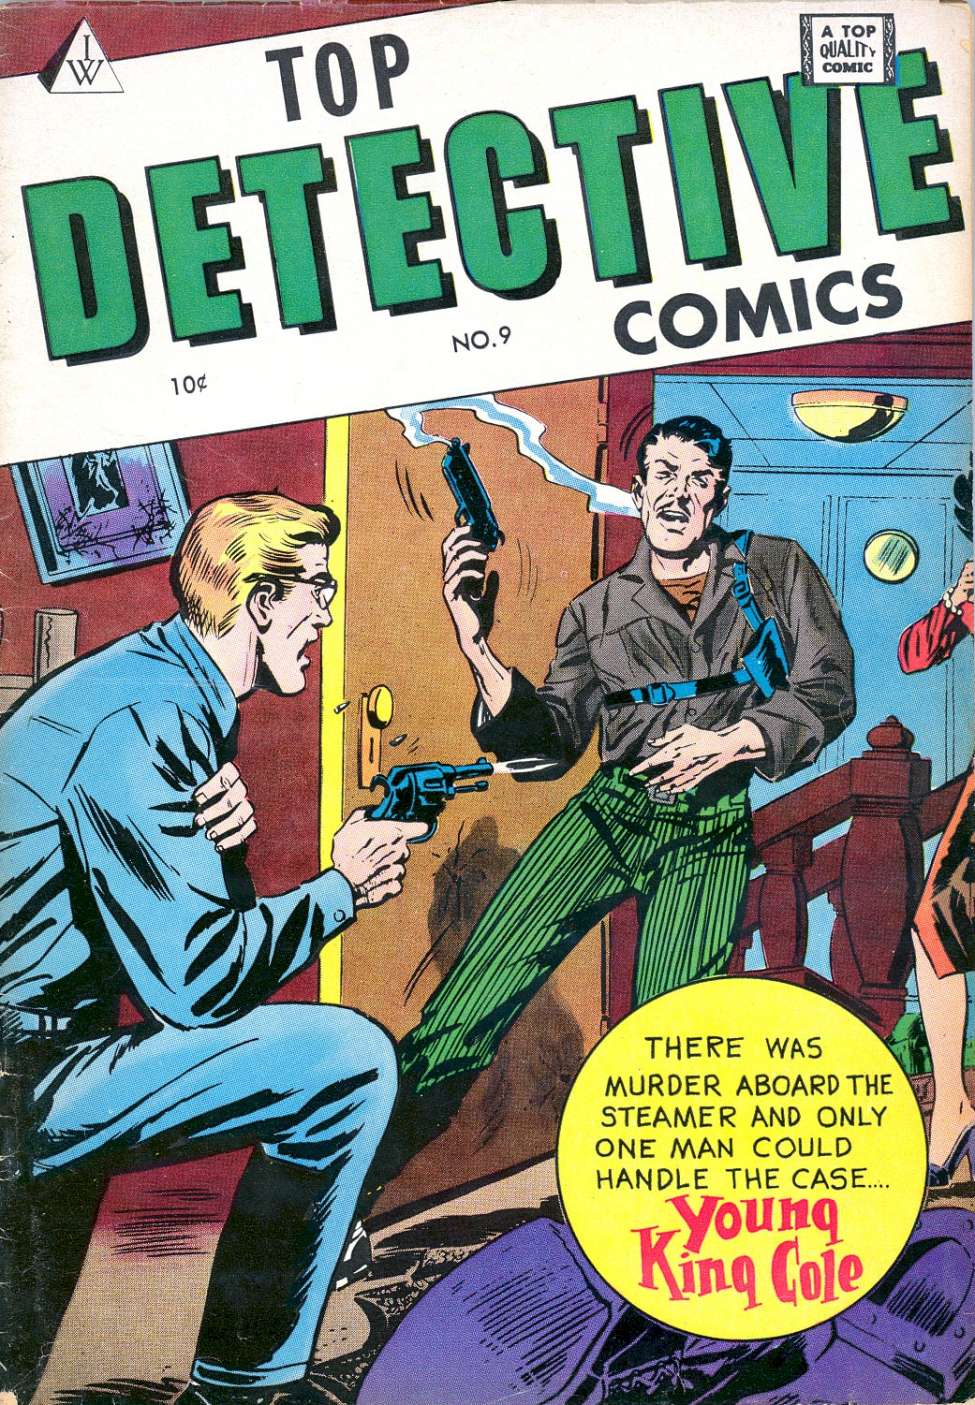 Book Cover For Top Detective Comics 9